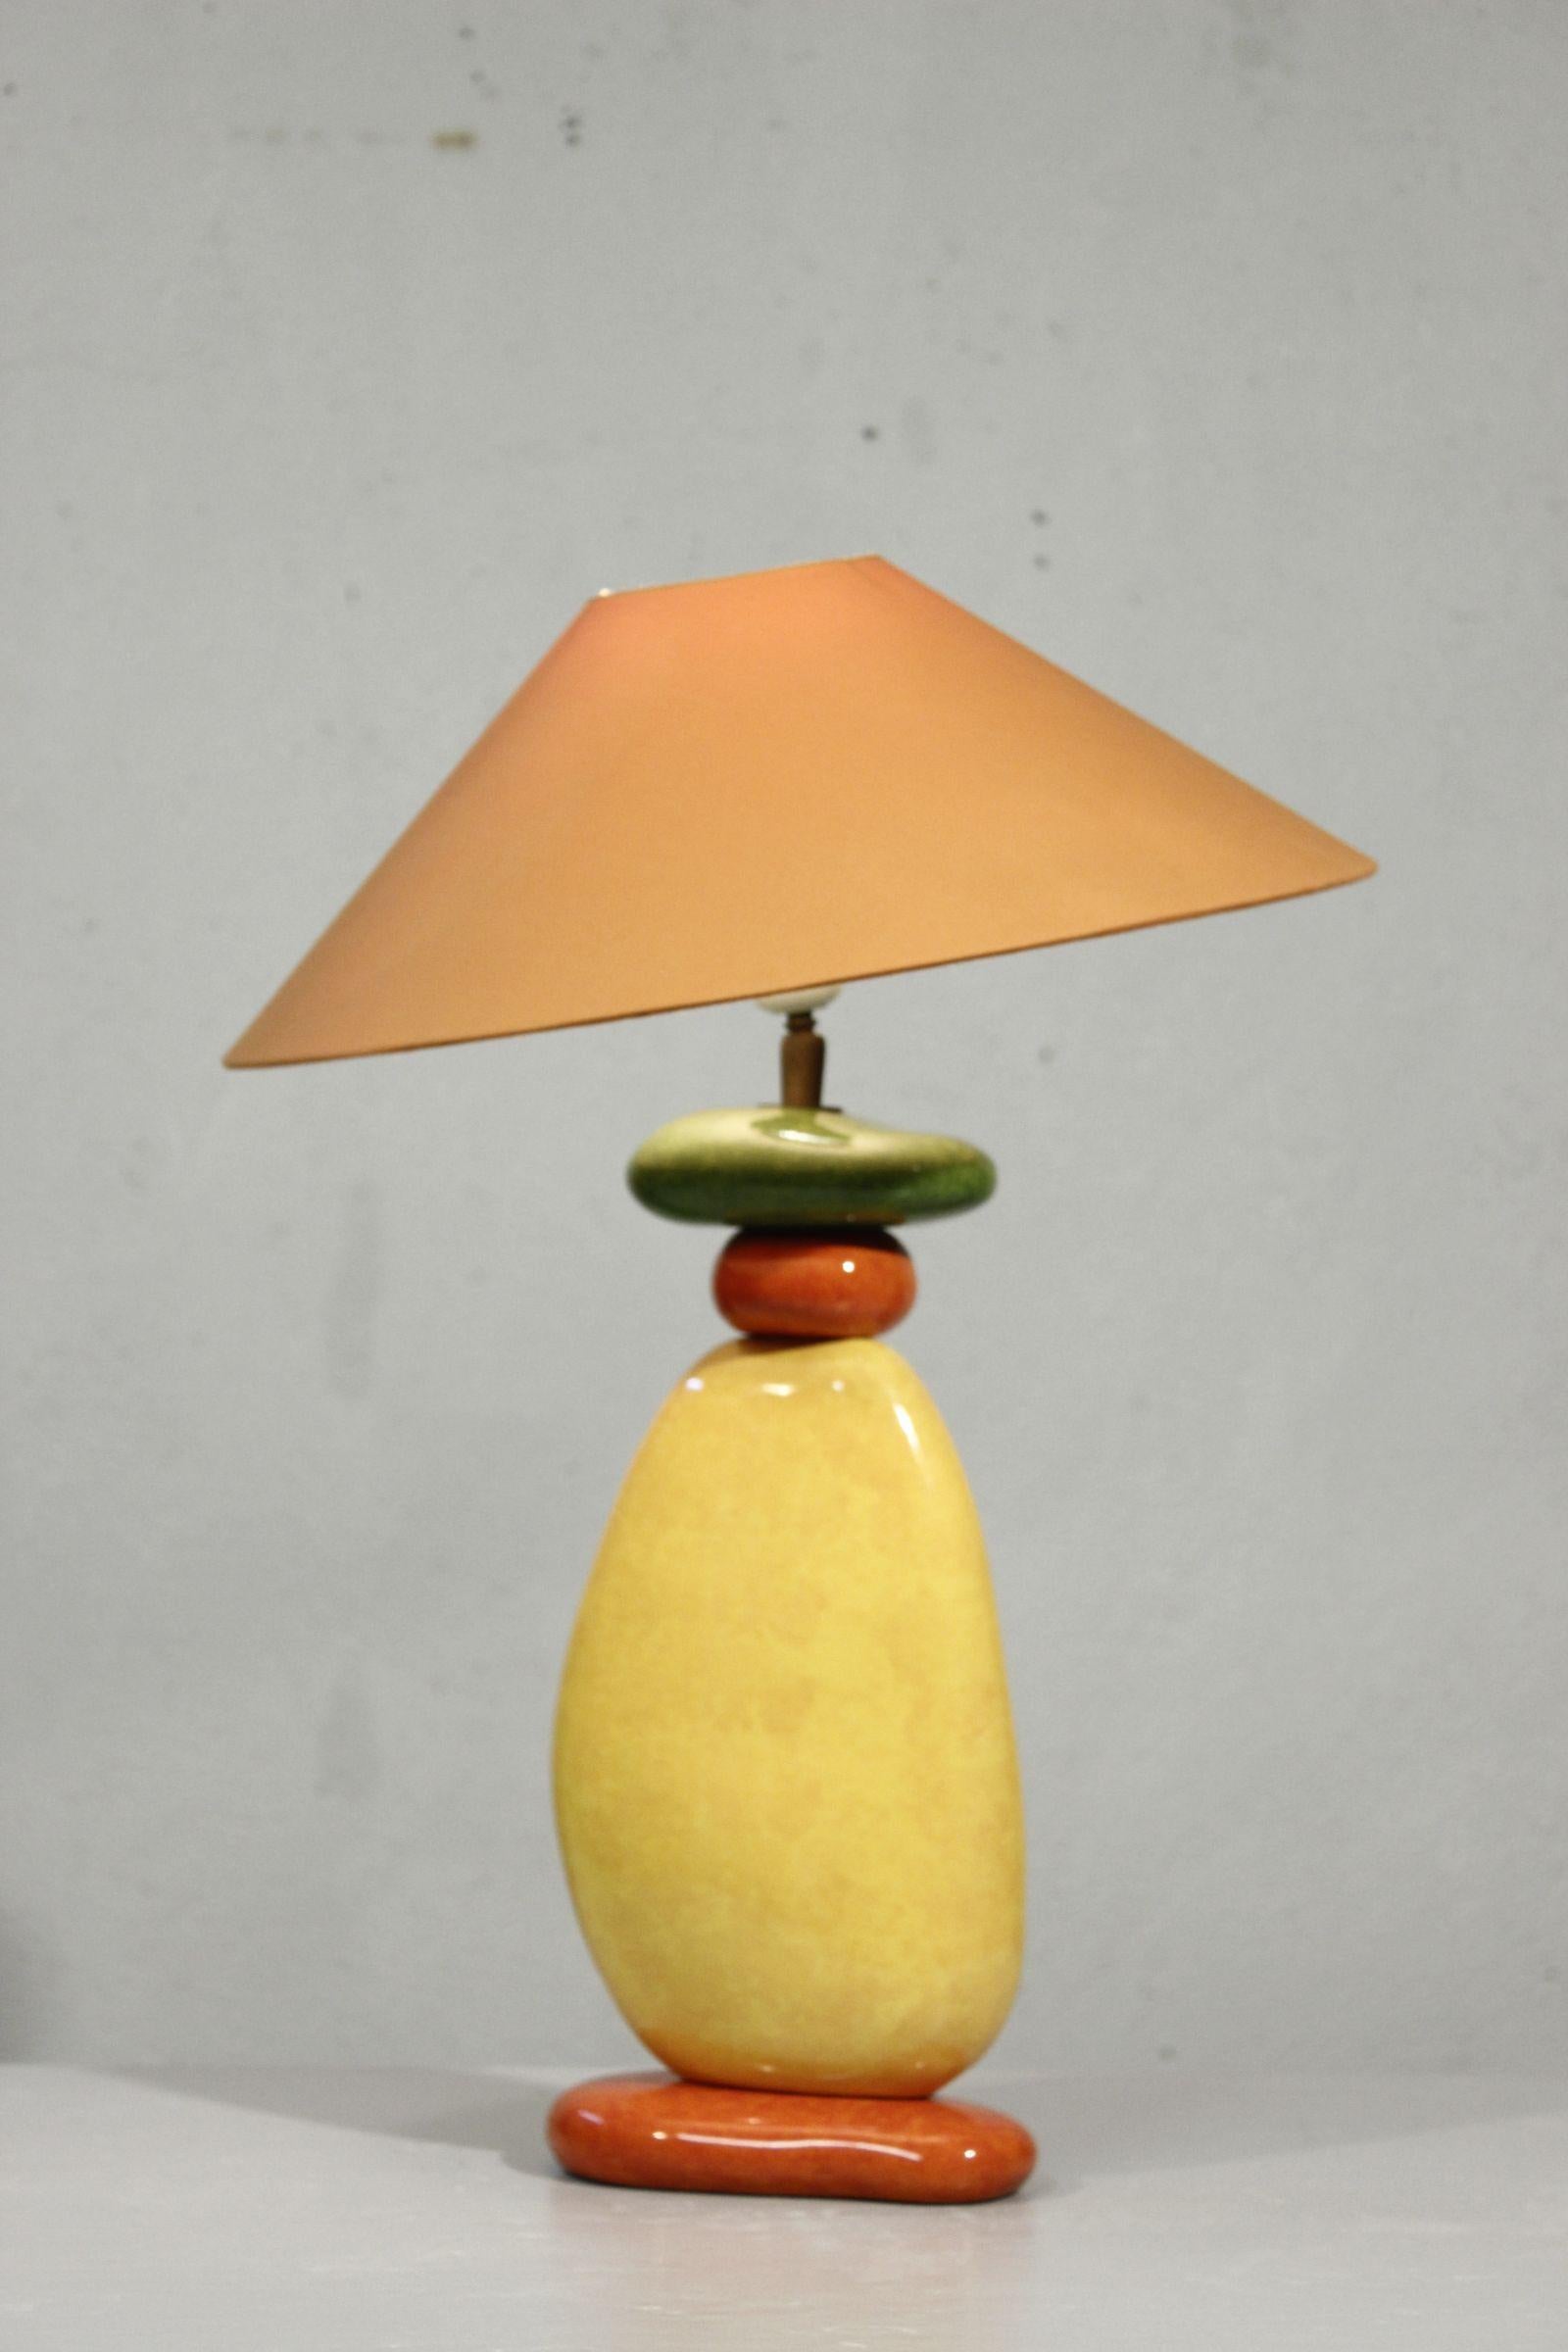 Pebble table lamp designed & produced by François Chatain circa 1990, composed of four ceramic pebbles with alternating orange, yellow, red and green vibrant and shiny enamel.

The base is topped with a brass rod with ball joint which allows the